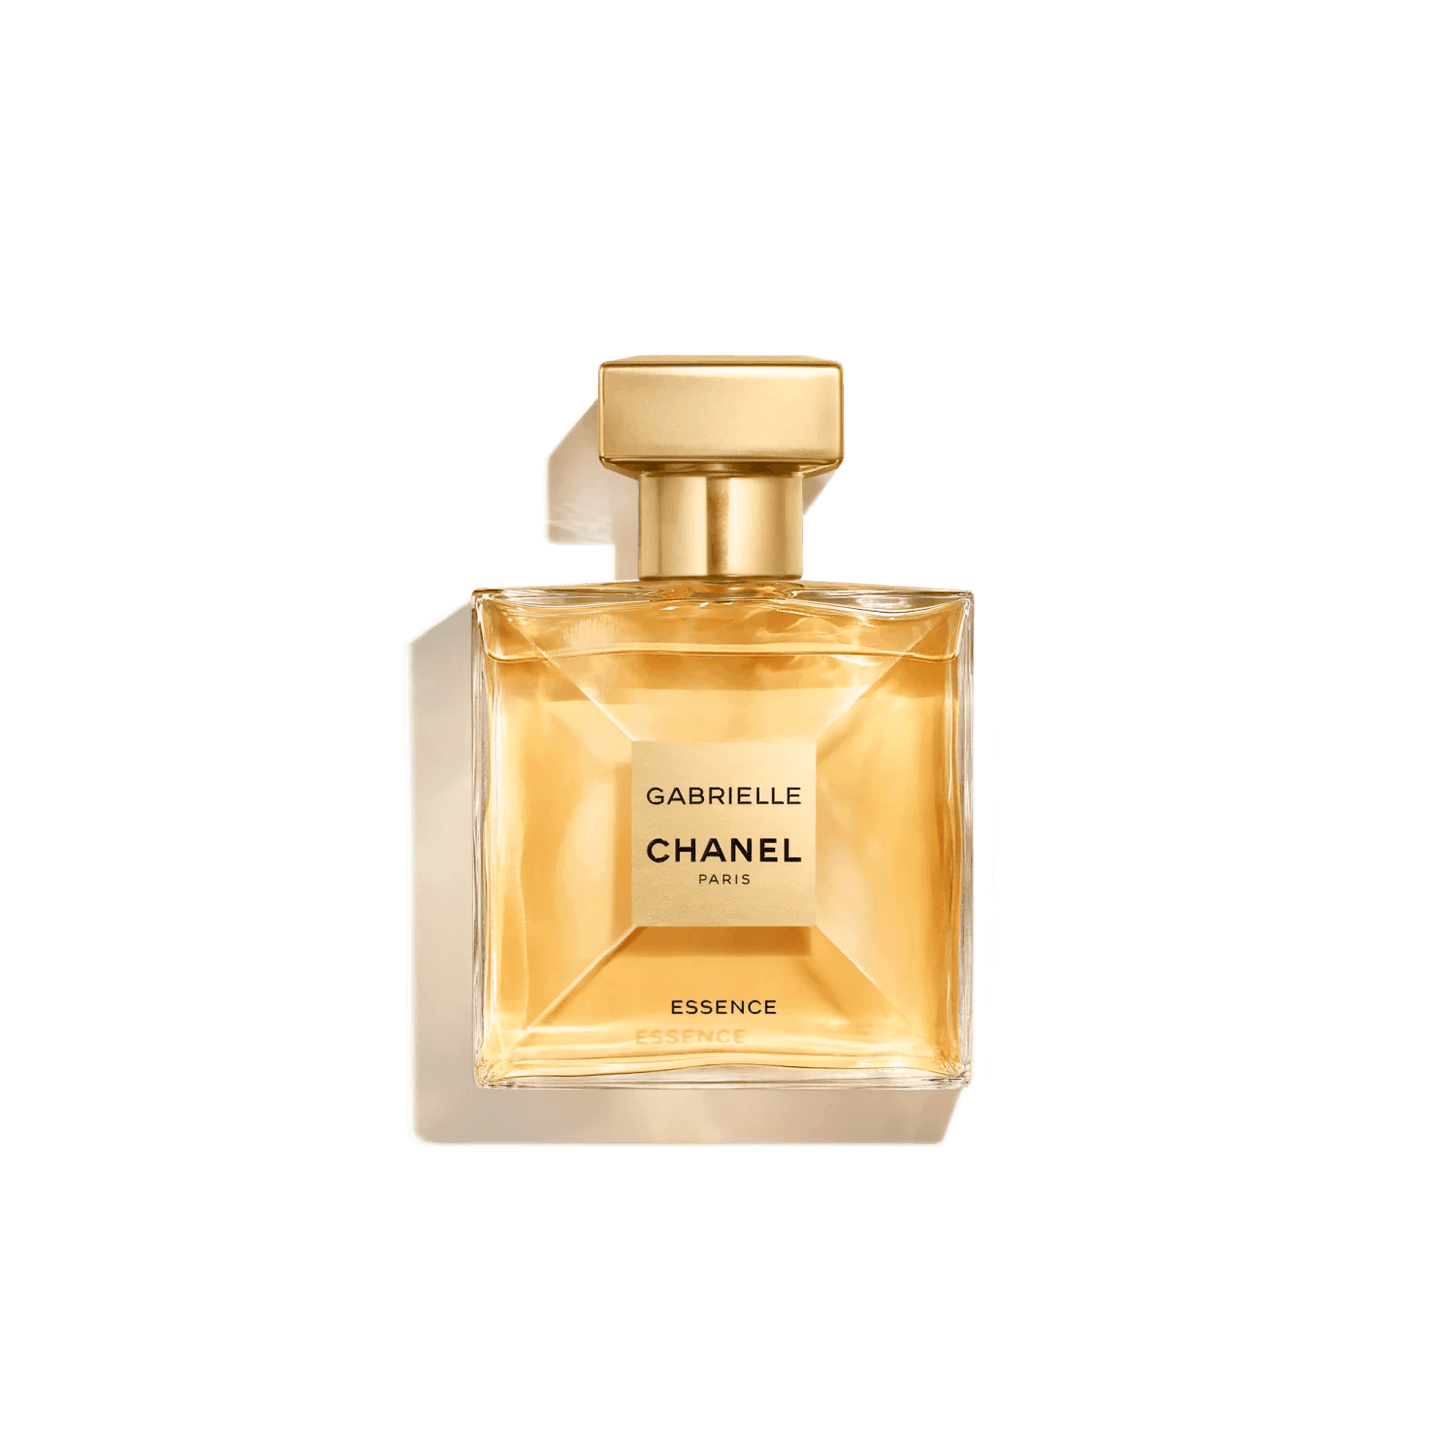 Clearance Fragrance Specials – HOSTDIEN